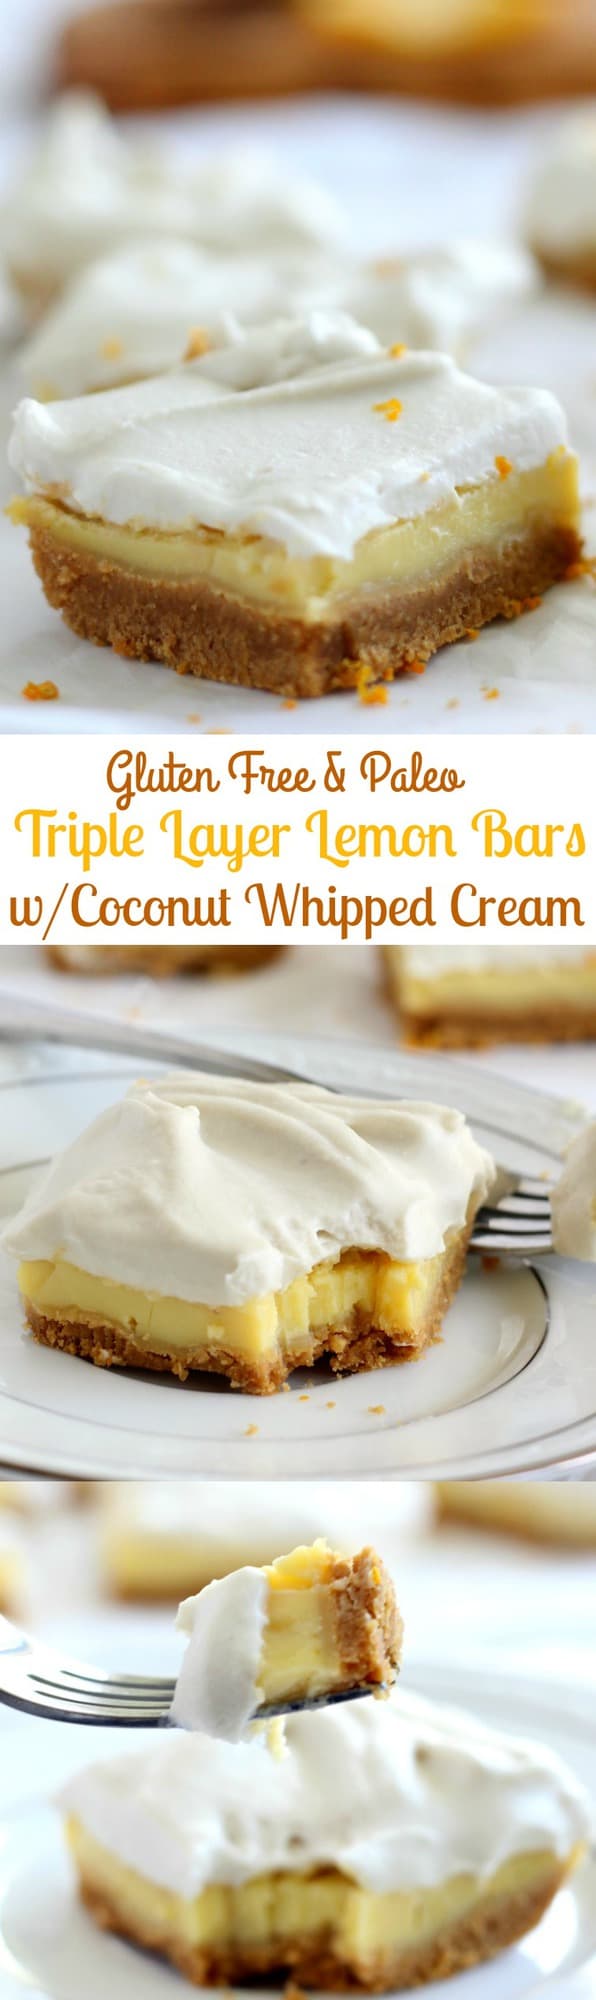 Triple Layer Paleo Lemon Bars that are gluten free, dairy free, #Paleo - topped with easy coconut whipped cream - these bars are a dream!